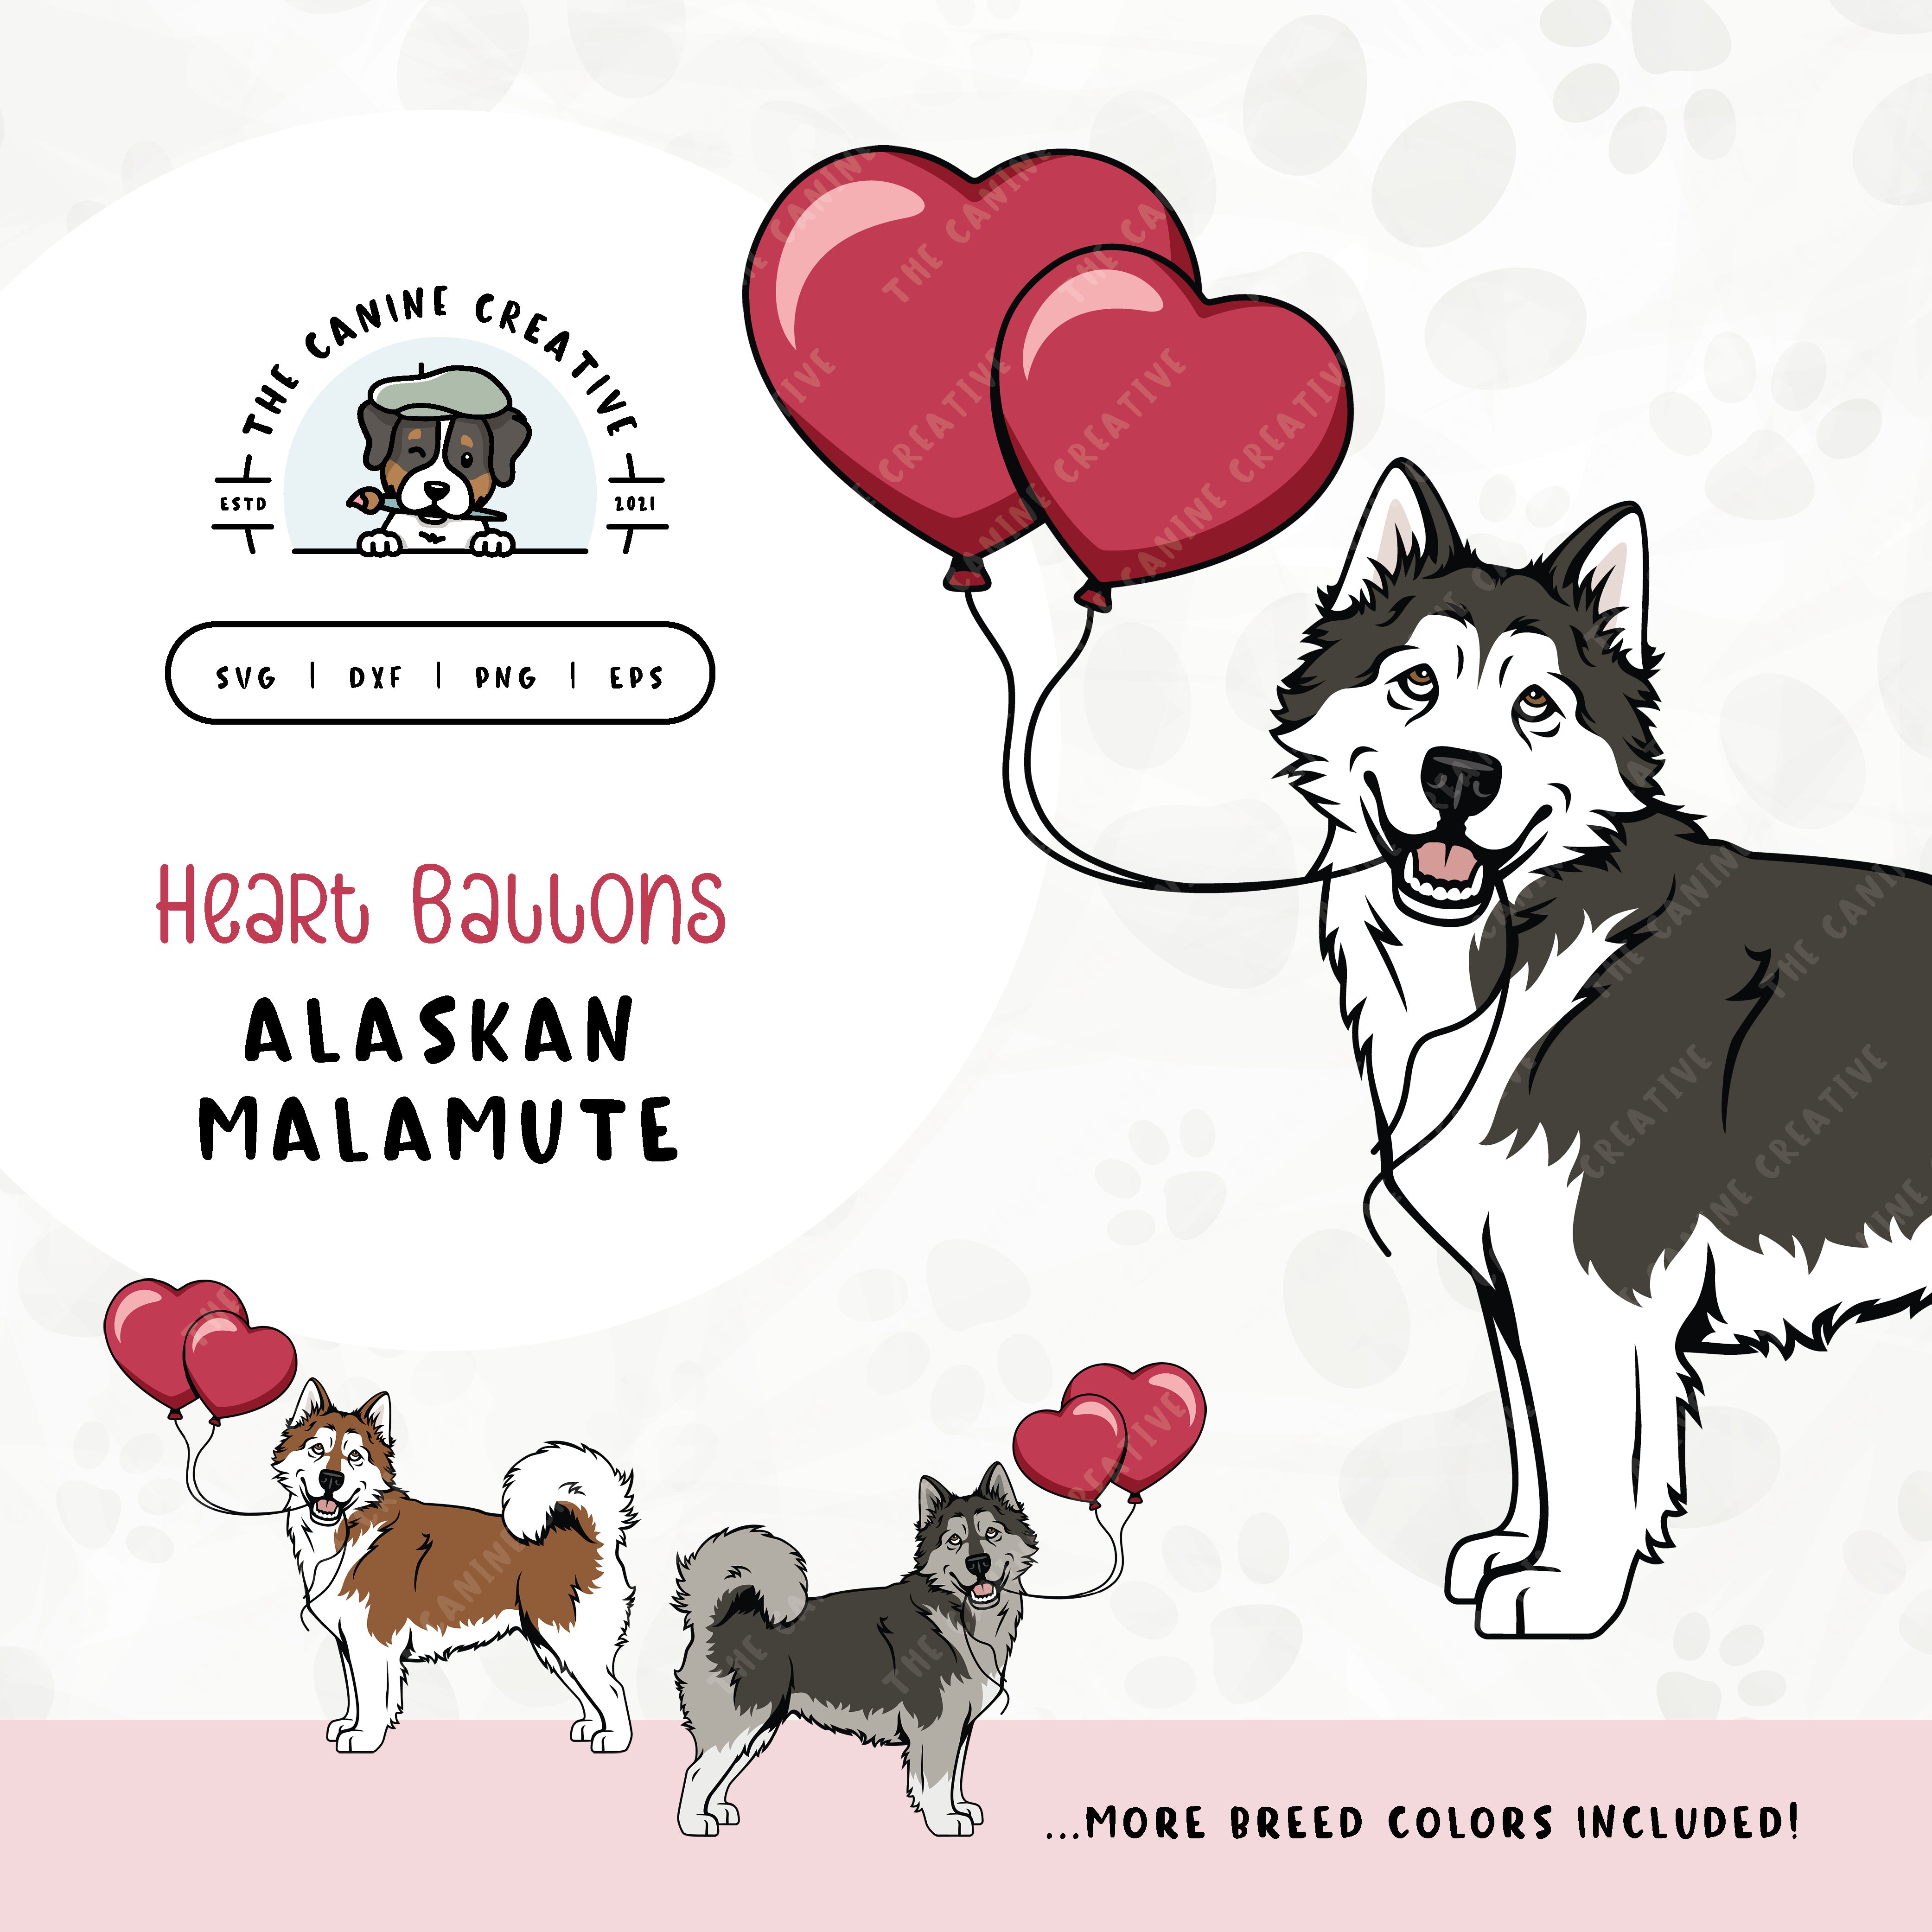 This charming illustration of an Alaskan Malamute features a dog holding heart-shaped balloons. File formats include: SVG, DXF, PNG, and EPS.